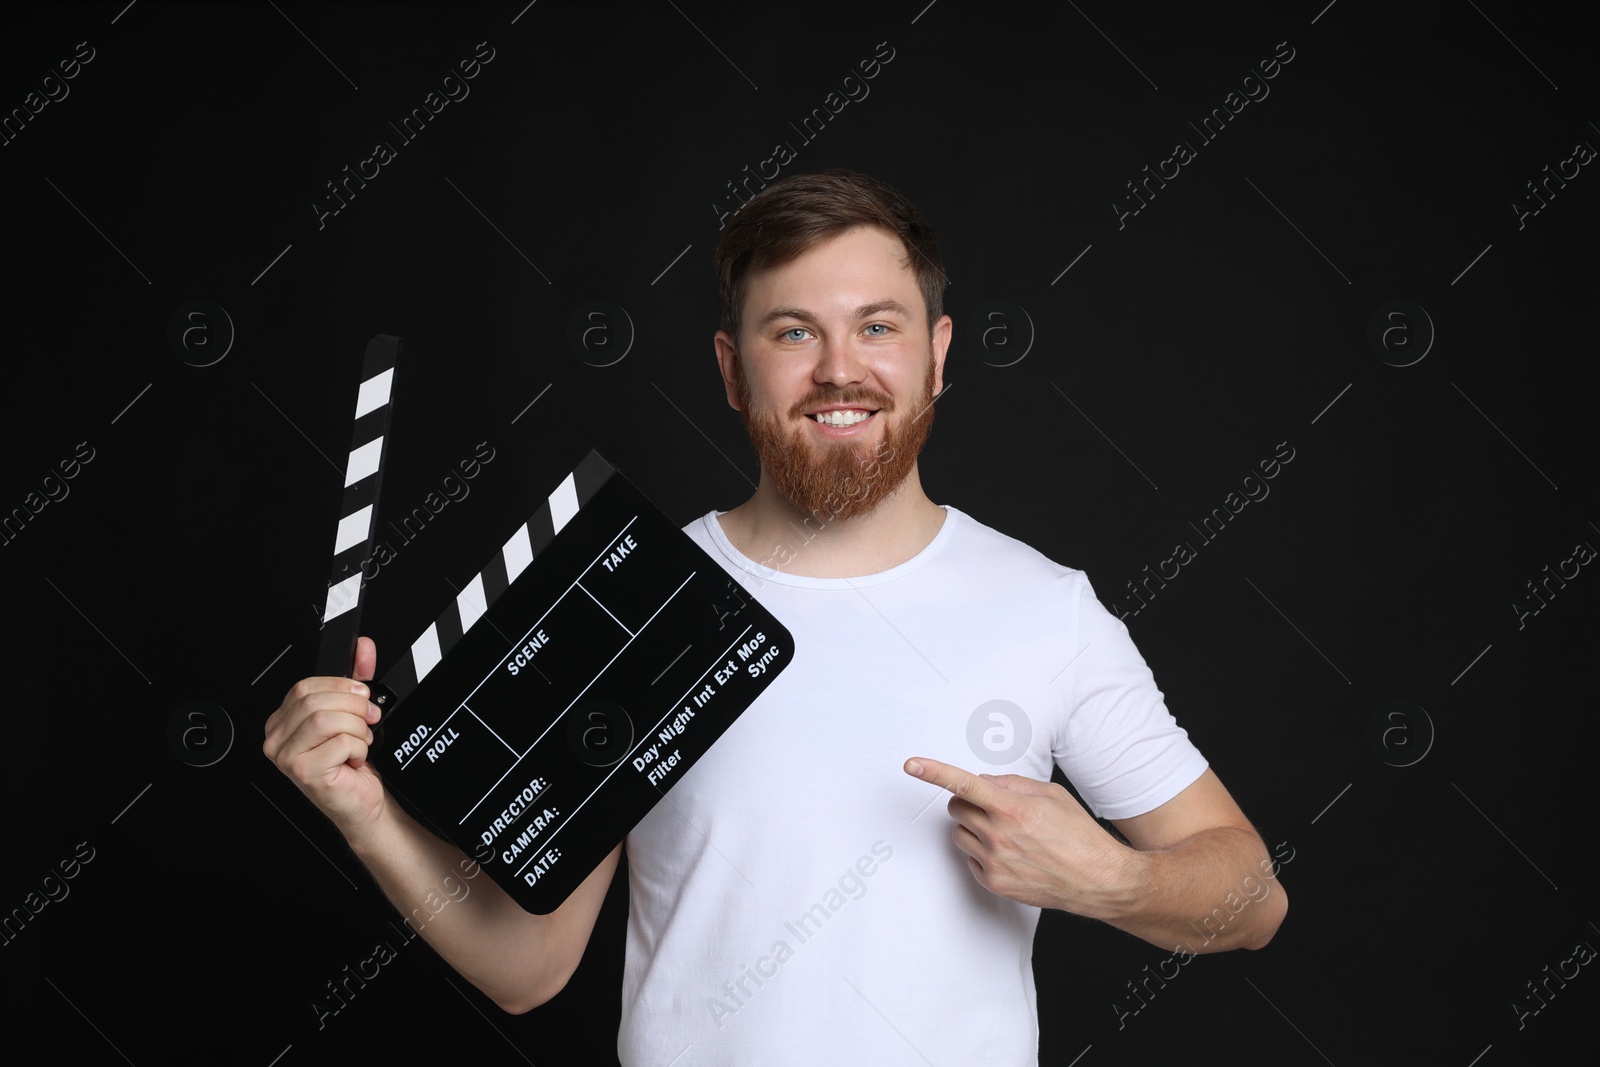 Photo of Making movie. Smiling man pointing at clapperboard on black background